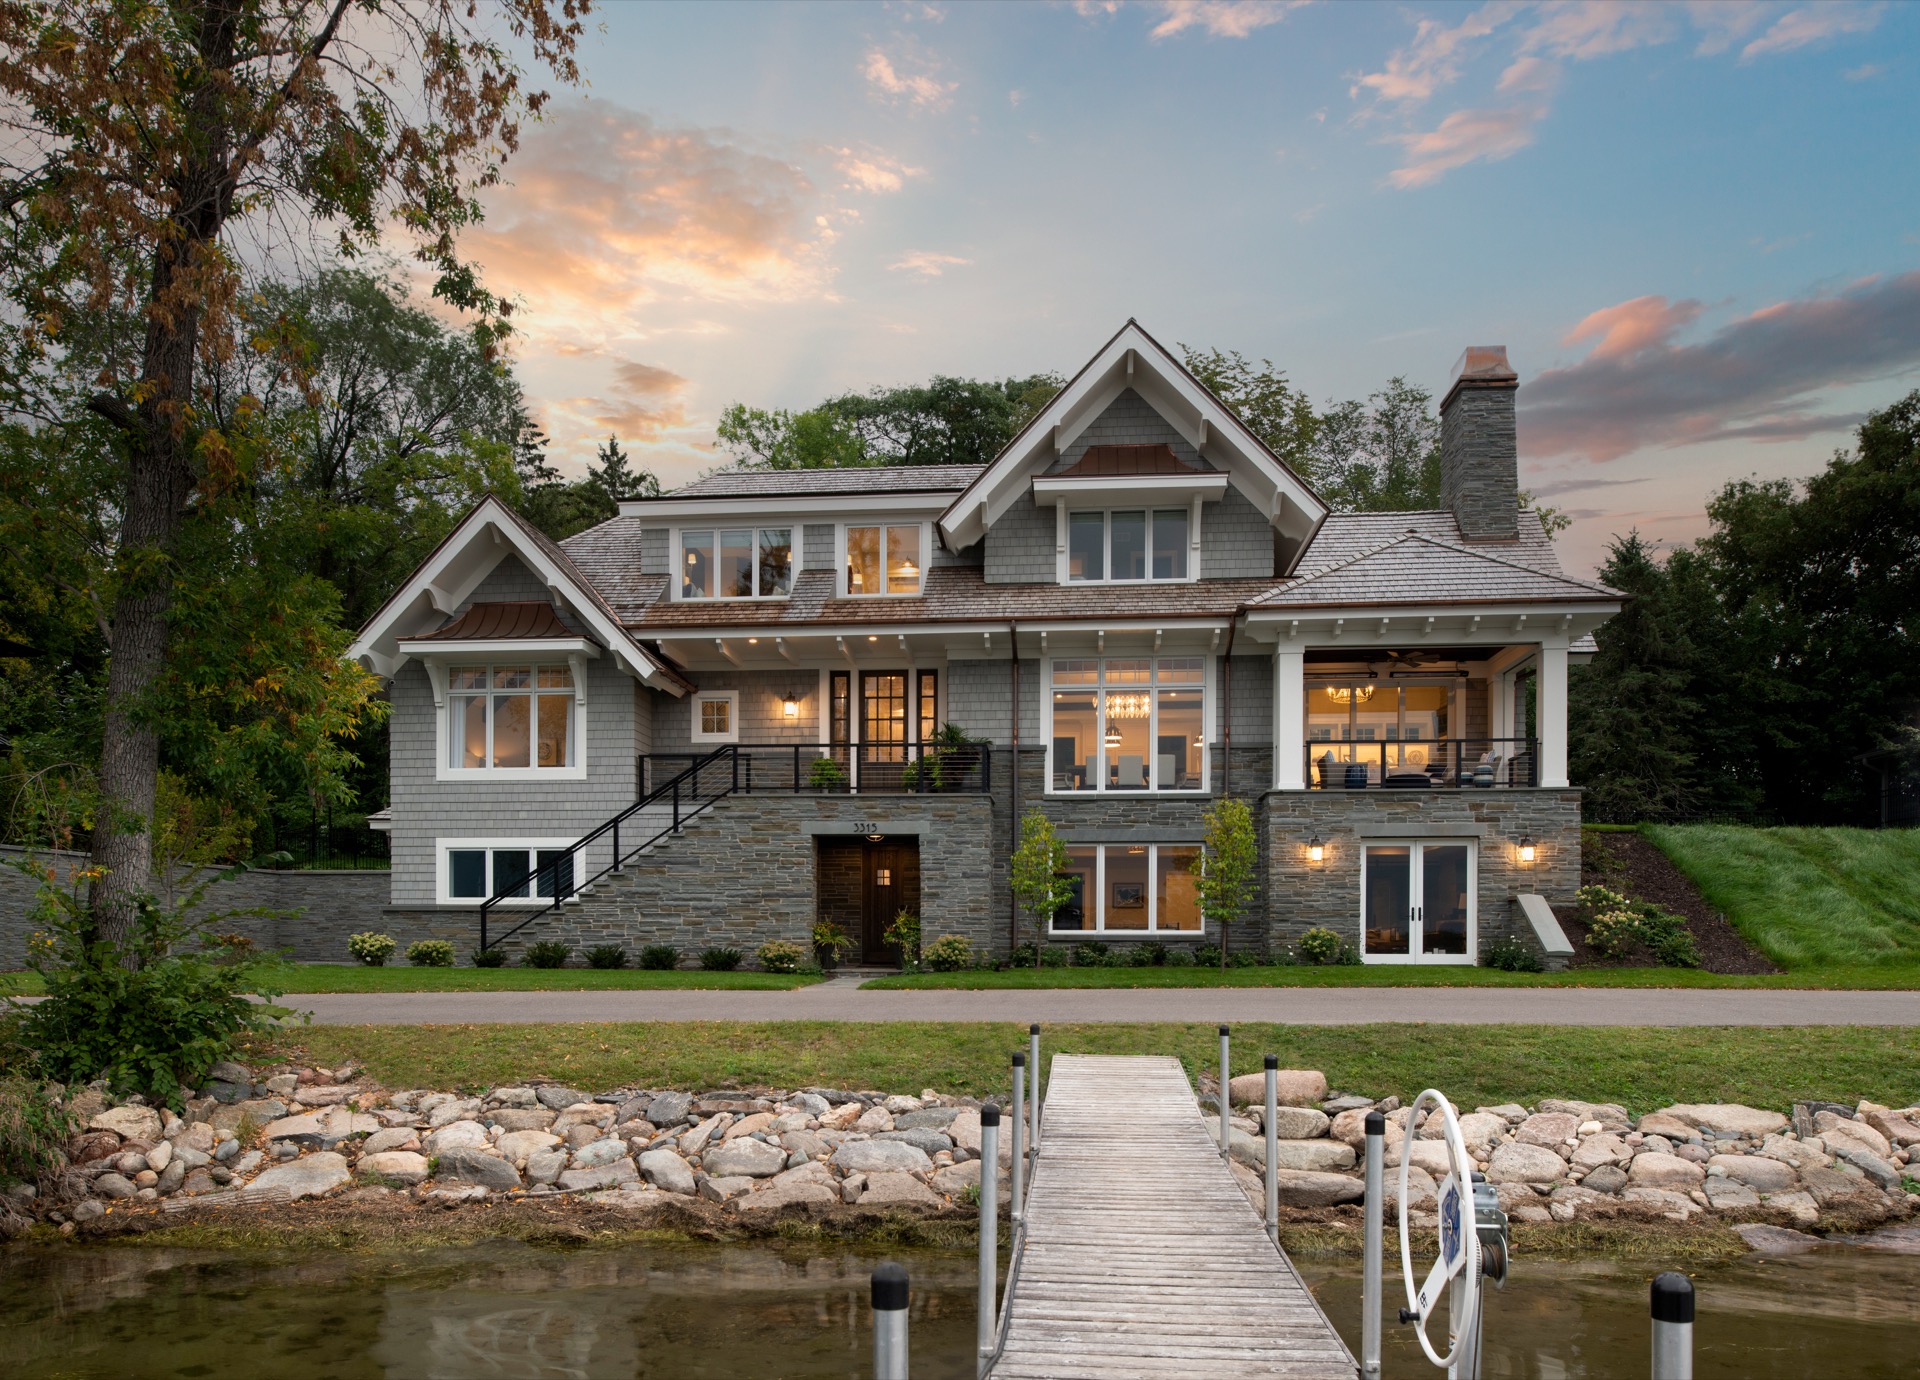 The view from a dock of a Gordon James luxury lakeside home on Crystal Bay in Minnetonka, Minnesota at dusk.